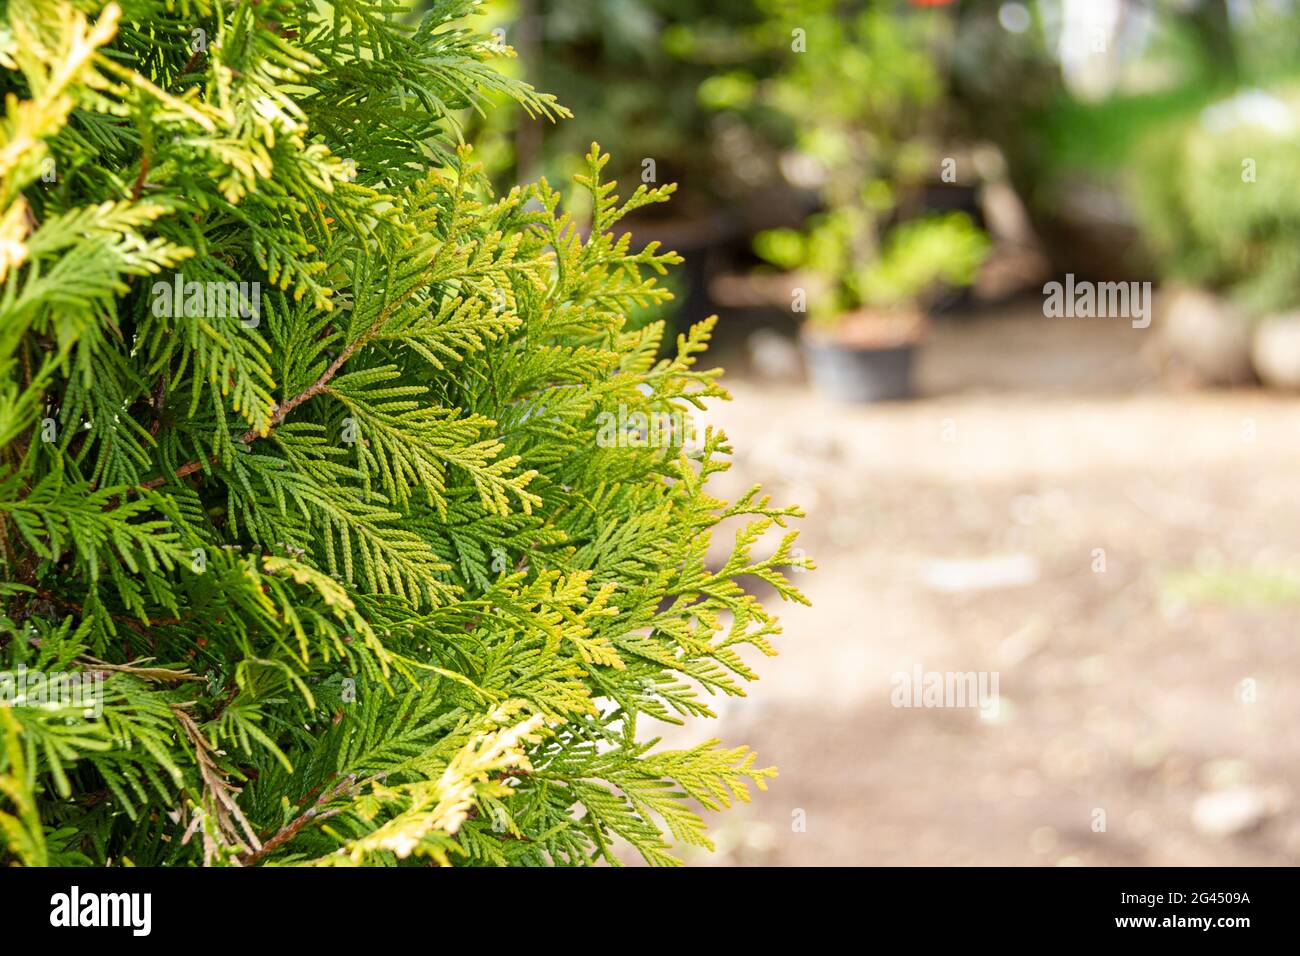 Close-up of juniper branches with copy space. Selective focuse on needles on juniper branches. Nature concept for design background. Stock Photo